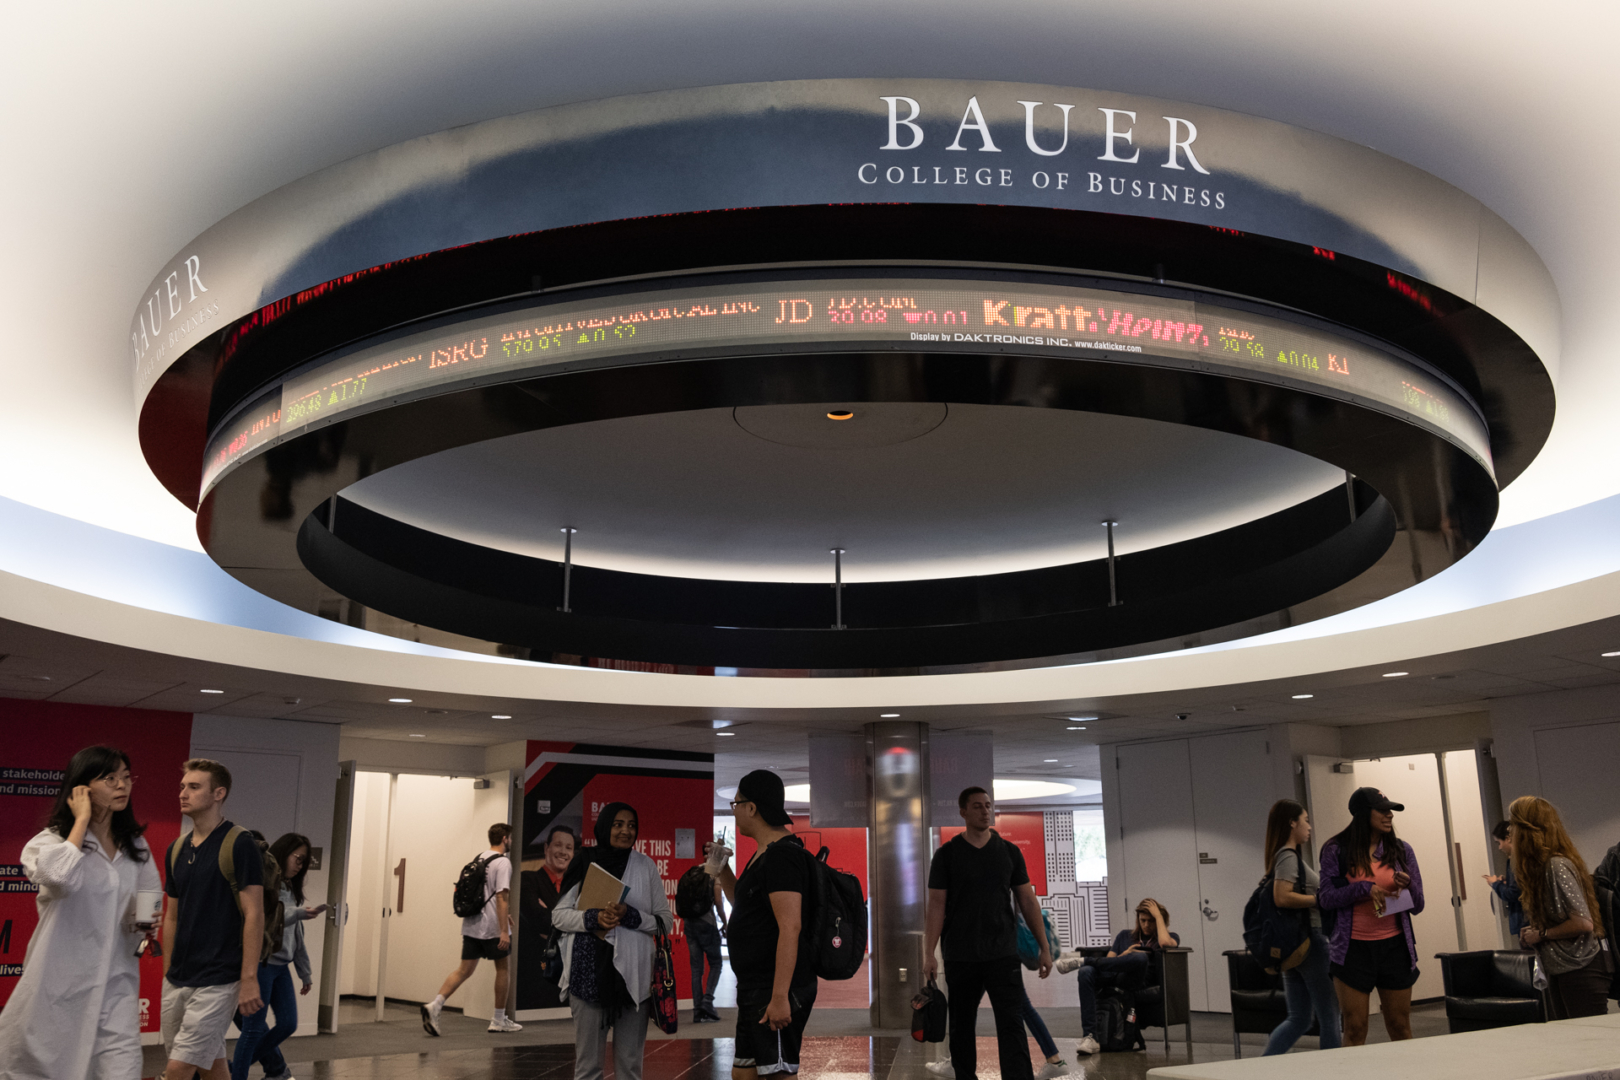 There were over 120 applicants to The Bauer Sales Academy, but only 30 were admitted.